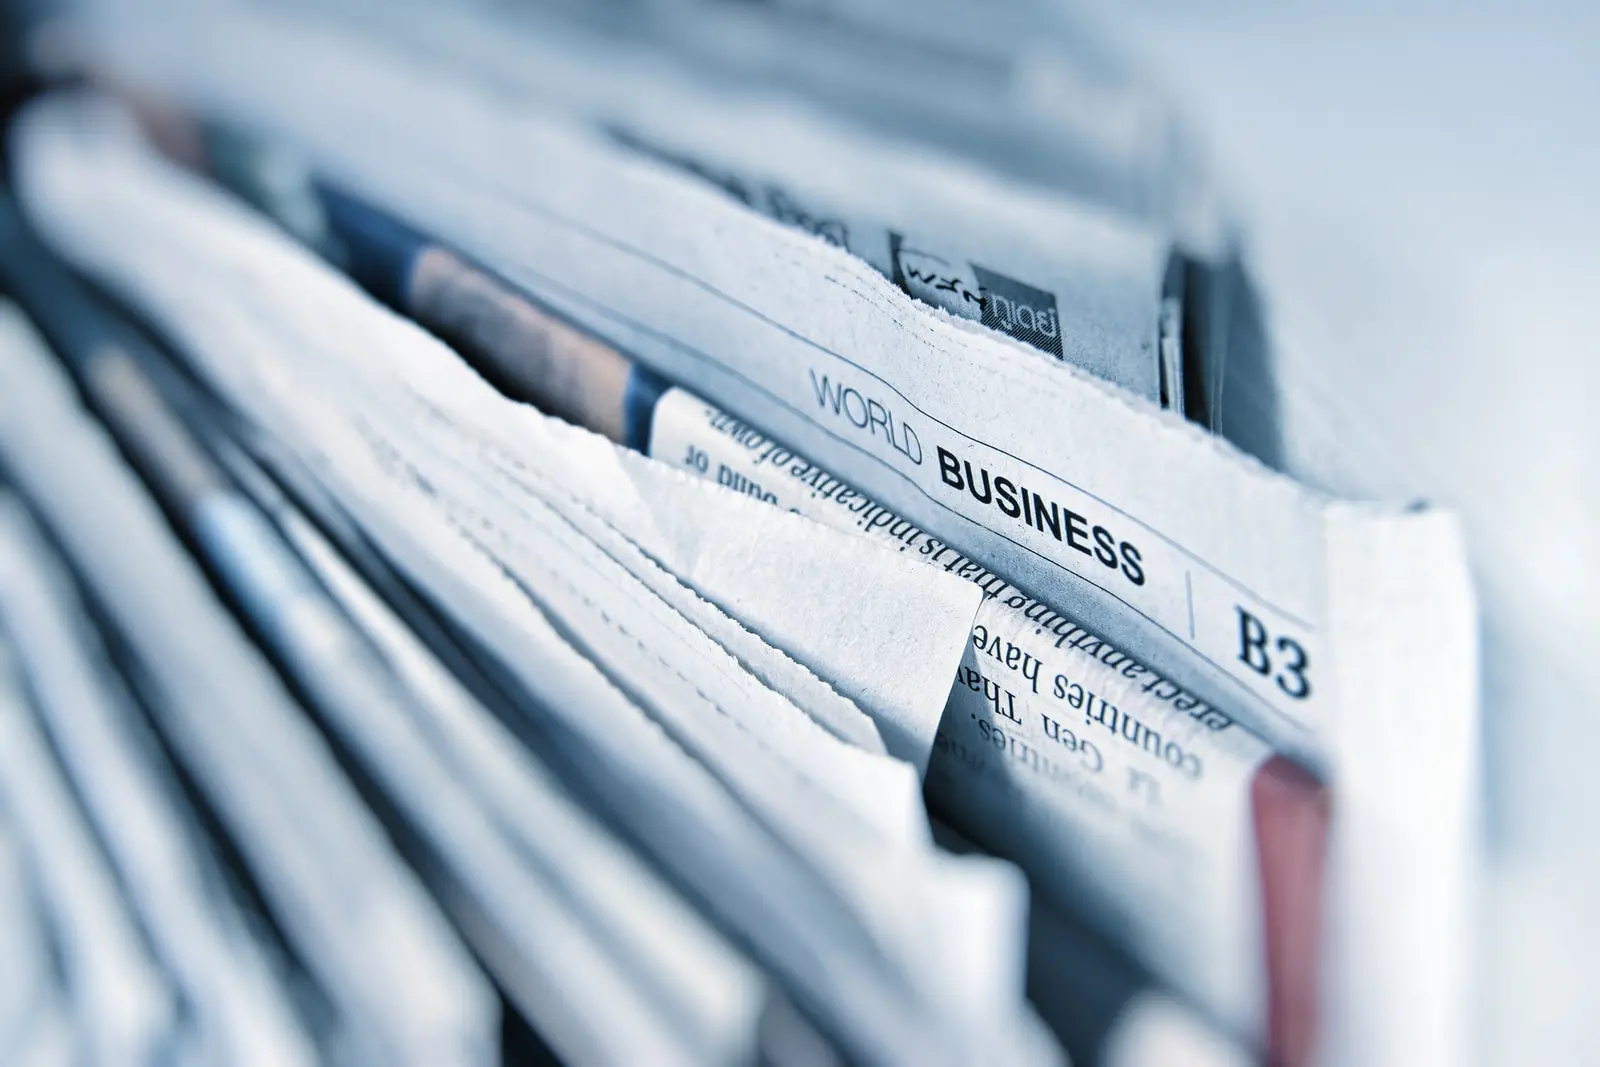 Business newspapers for fire